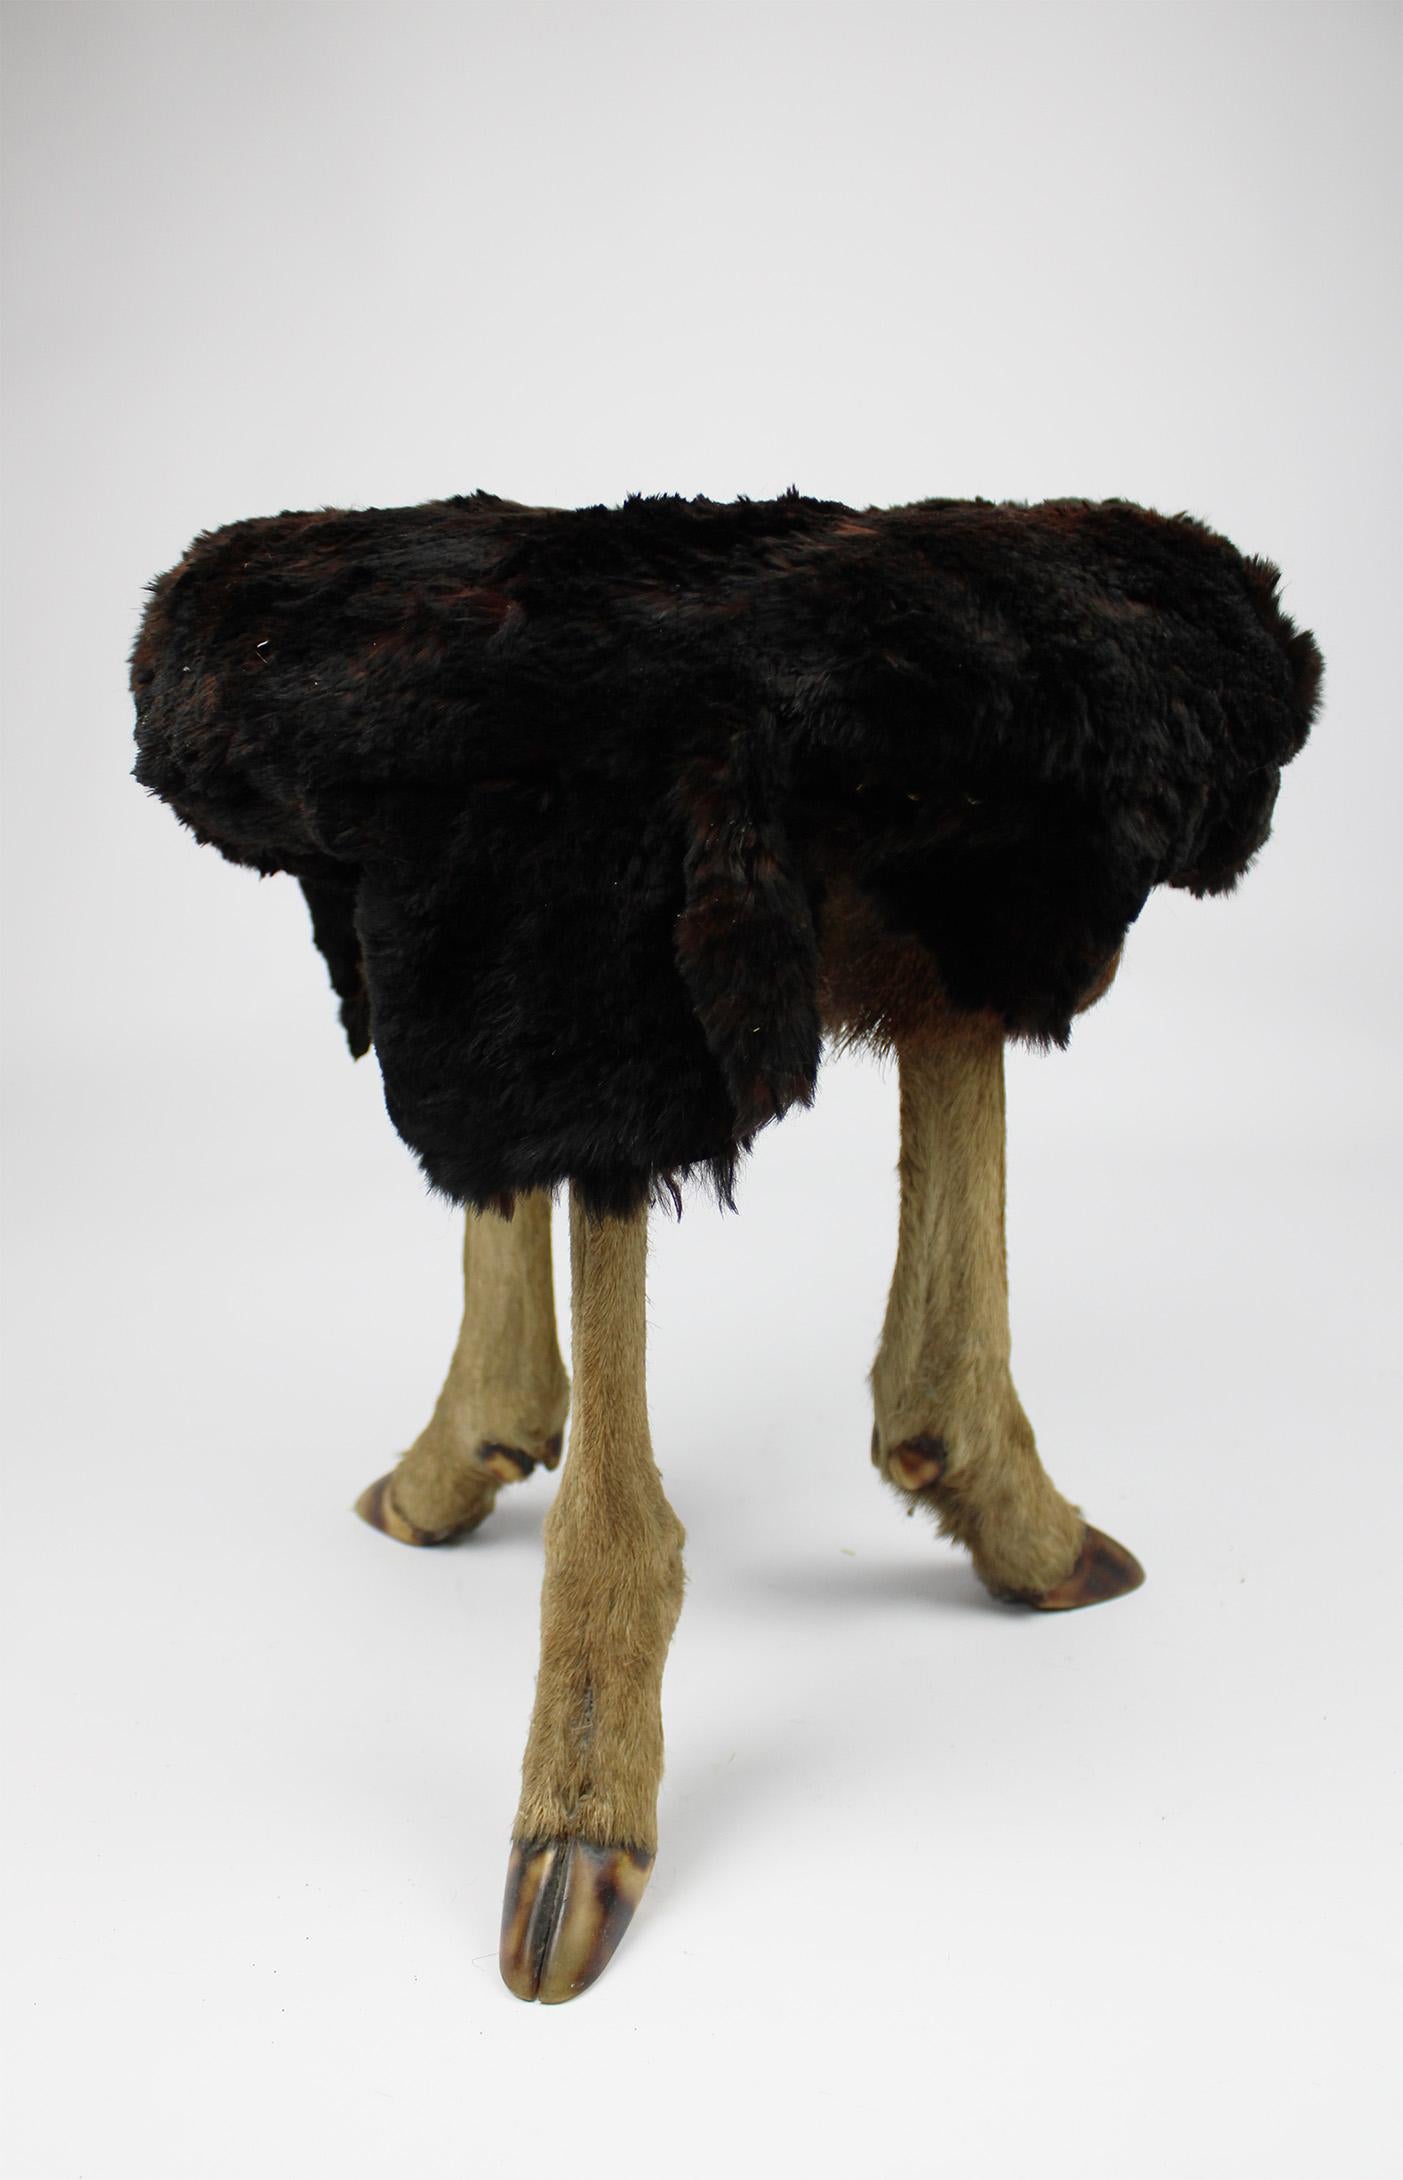 This amazing tabouret is a unique piece that is handmade and upholstered with beaver fur. The legs of this stool come from a deer that served as a hunting trophy in the late 1970s in France. The combination with the beaver fur laid out makes this